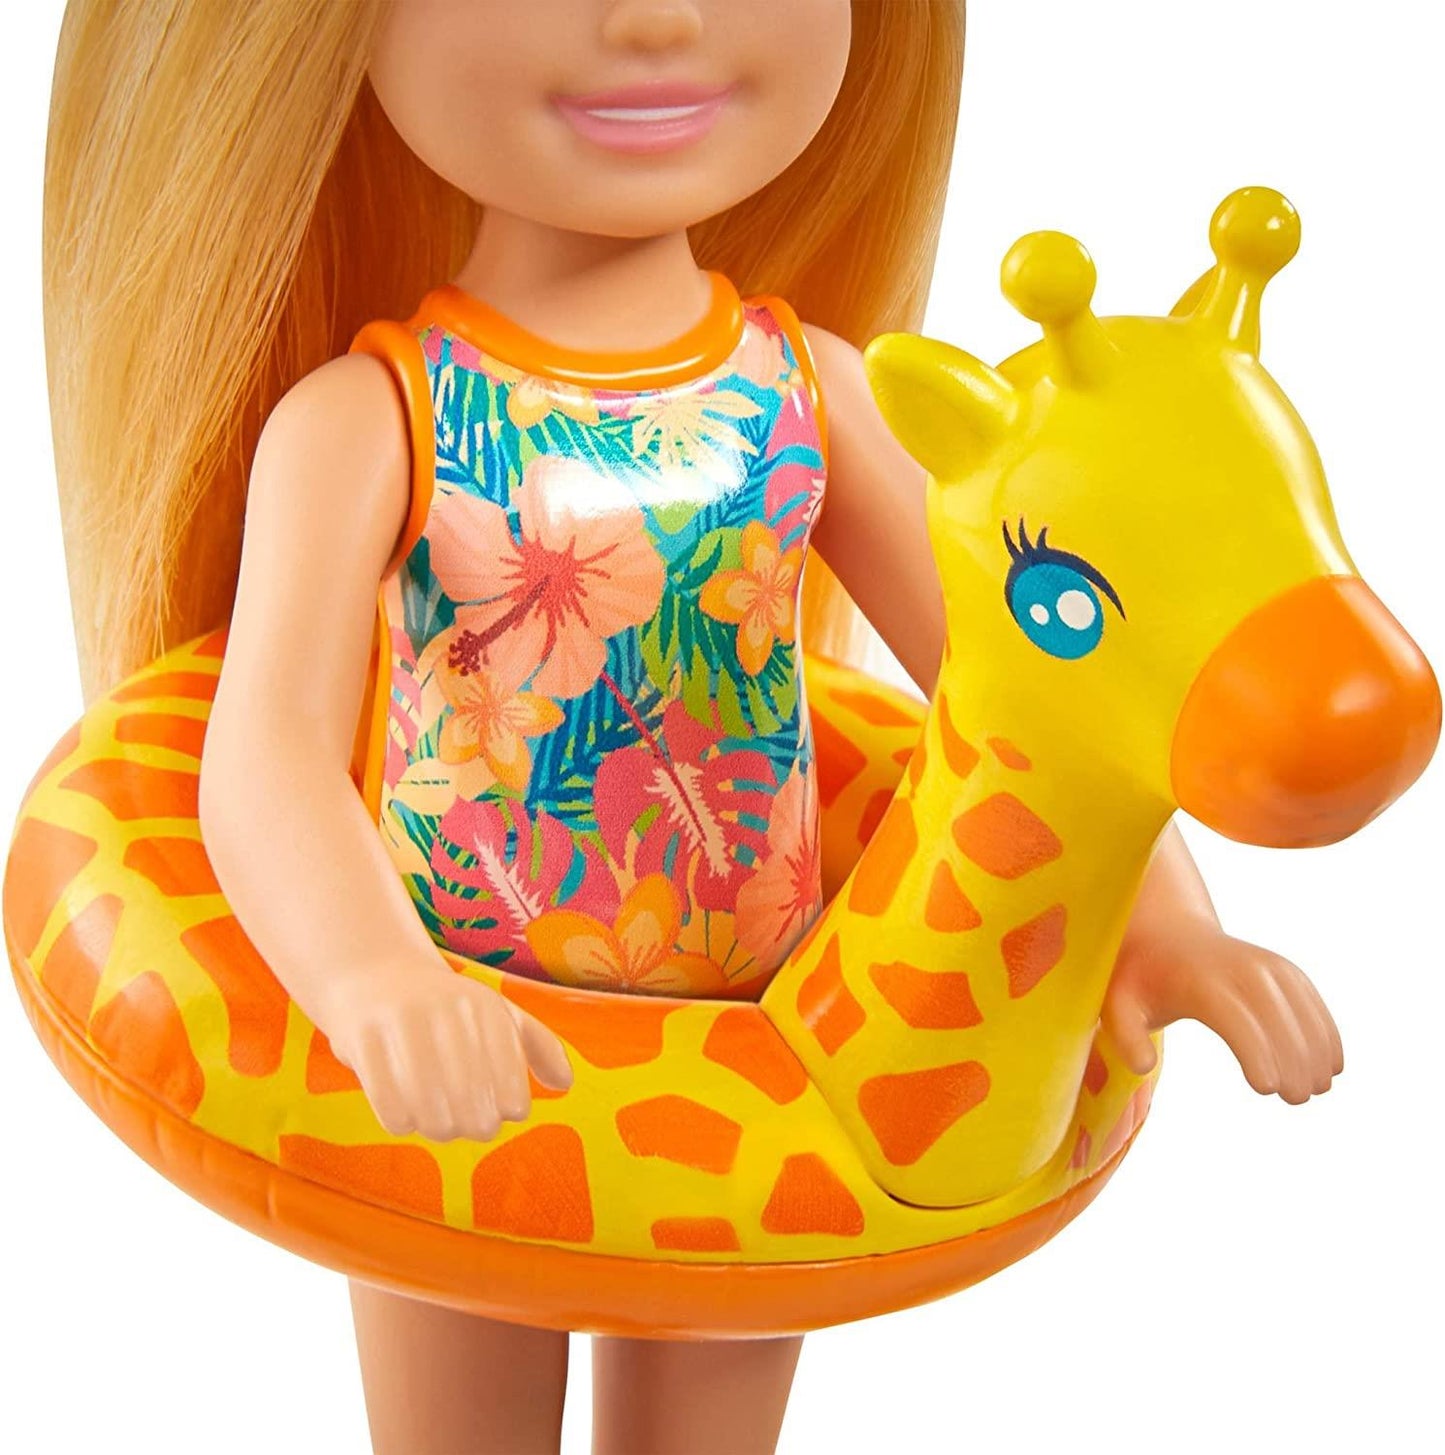 Barbie and Chelsea The Lost Birthday with Giraffe Pet by Barbie - UKBuyZone